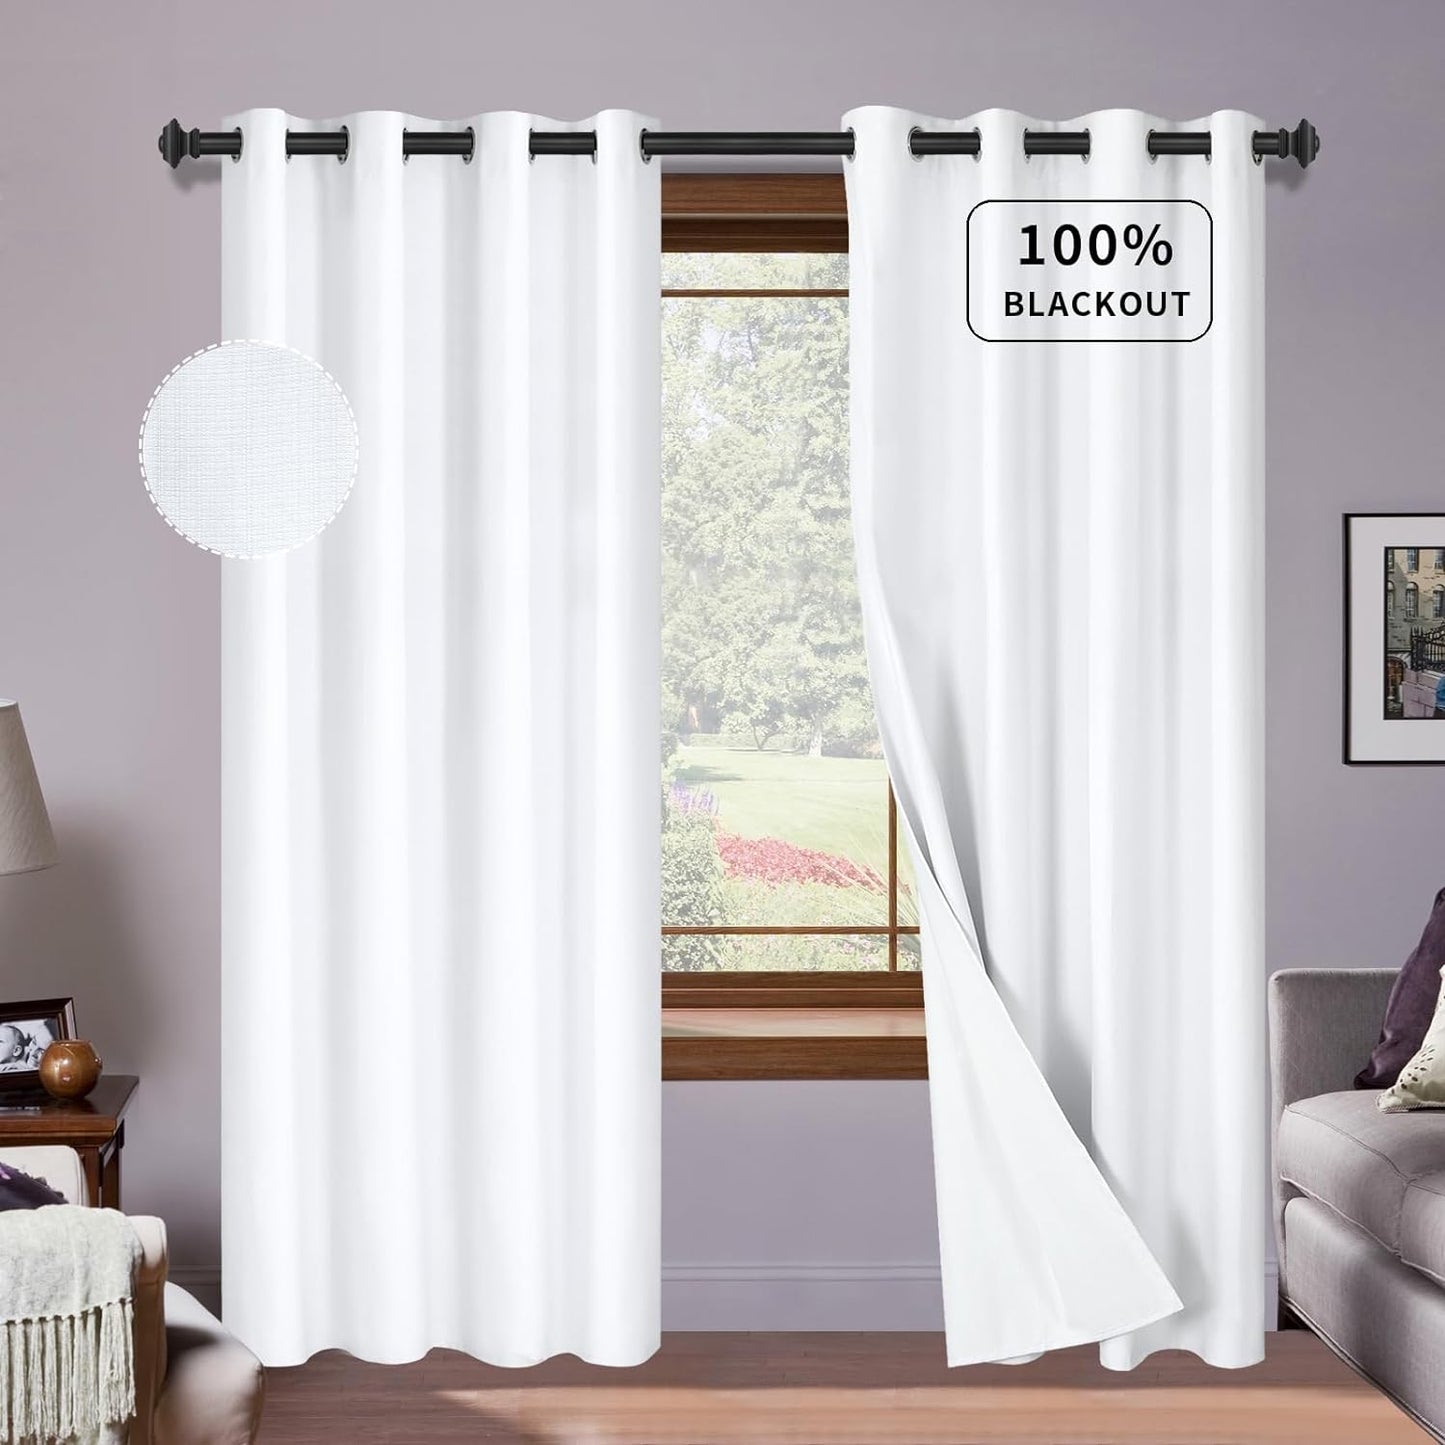 Purefit White Linen Blackout Curtains 84 Inches Long 100% Room Darkening Thermal Insulated Window Curtain Drapes for Bedroom Living Room Nursery with Anti-Rust Grommets & Energy Saving Liner, 2 Panels  PureFit White 52"W X 96"L 